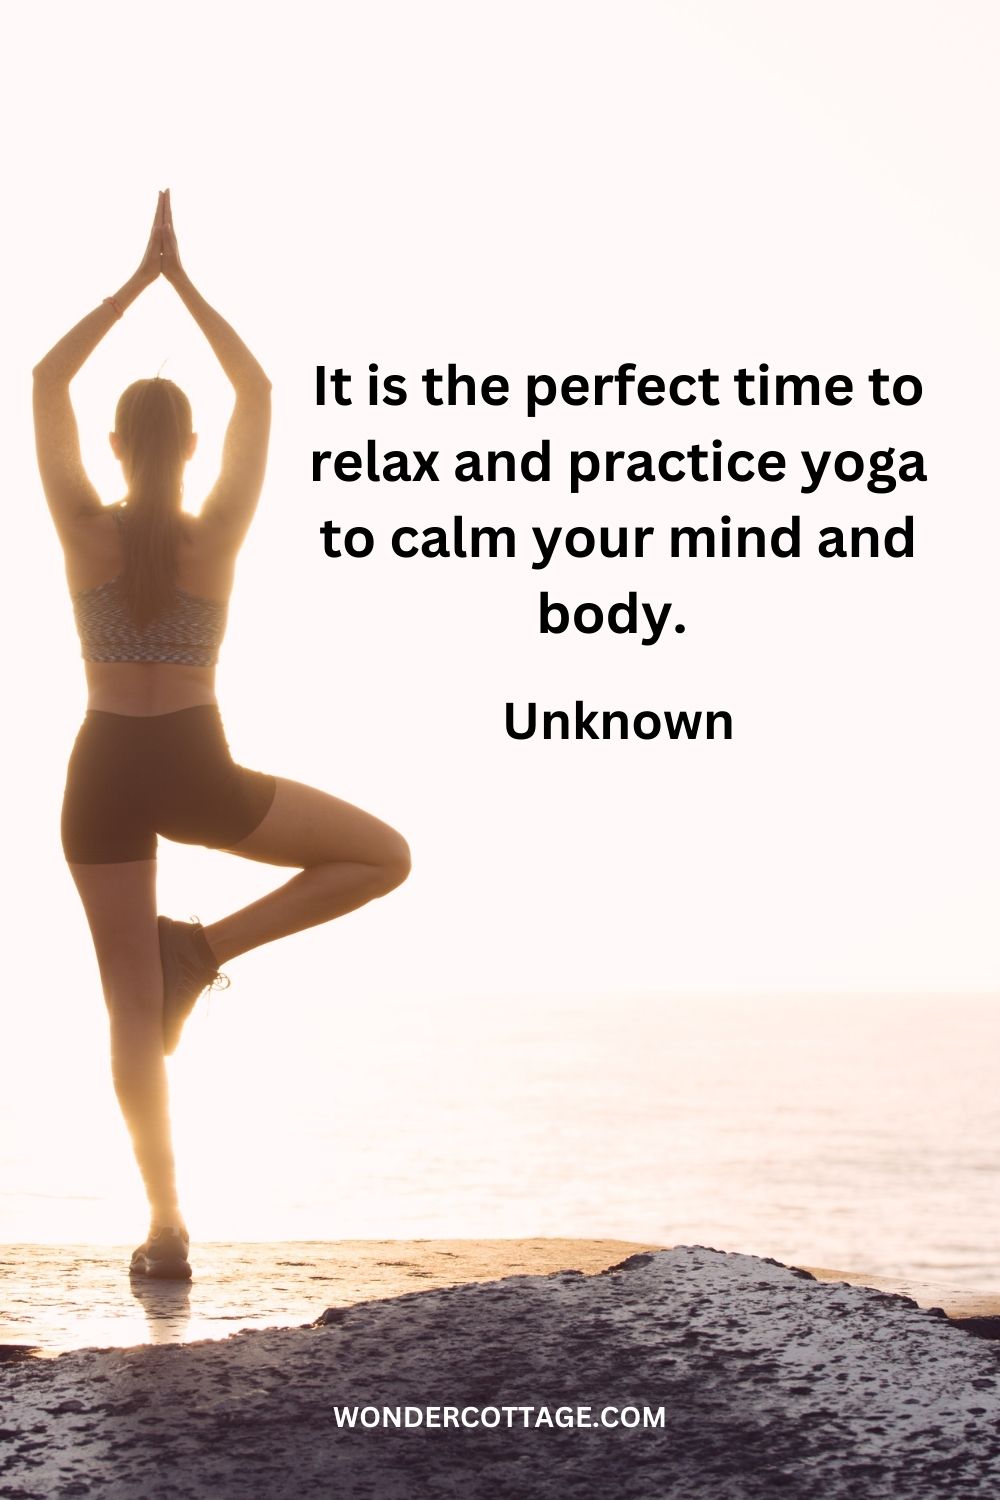 It is the perfect time to relax and practice yoga to calm your mind and body.  Unknown